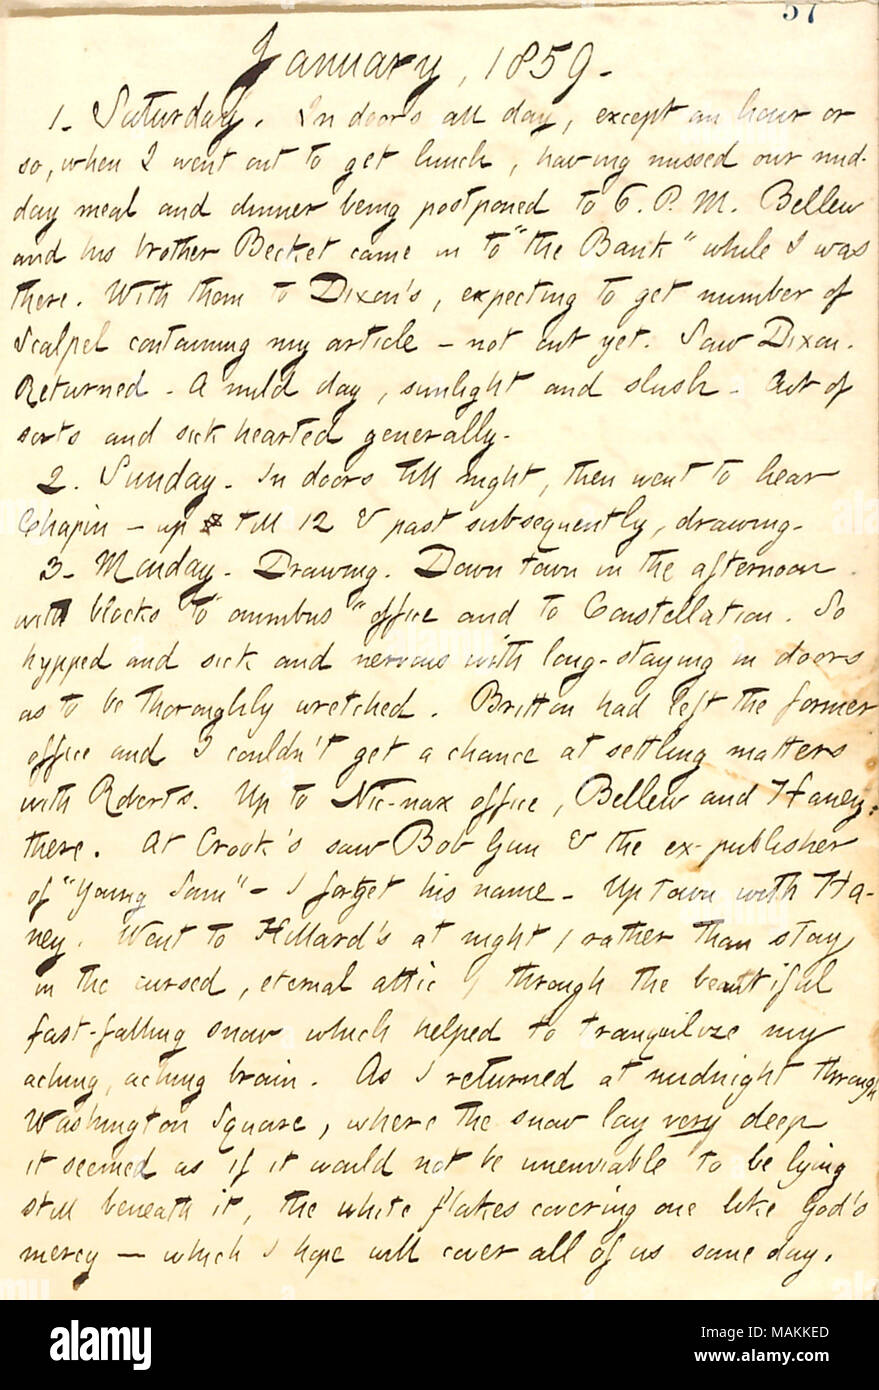 Mentions visits to Dr. Edward Dixon and Oliver Hillard.  Transcription: January, 1859. 1. Saturday. In doors all day, except an hour or so, when I went out to get lunch, having missed our midday meal and dinner being postponed to 6 P.M. [Frank] Bellew and his brother [Patrick] Becket [Bellew] came in to 'the Bank' while I was there. With them to [Dr. Edward] Dixon's, expecting to get number of Scalpel containing my article  ? not out yet. Saw Dixon. Returned. A mild day, sunlight and slush. Out of sorts and sick hearted generally. 2. Sunday. In doors till night, then went to hear [E.H.] Chapin Stock Photo